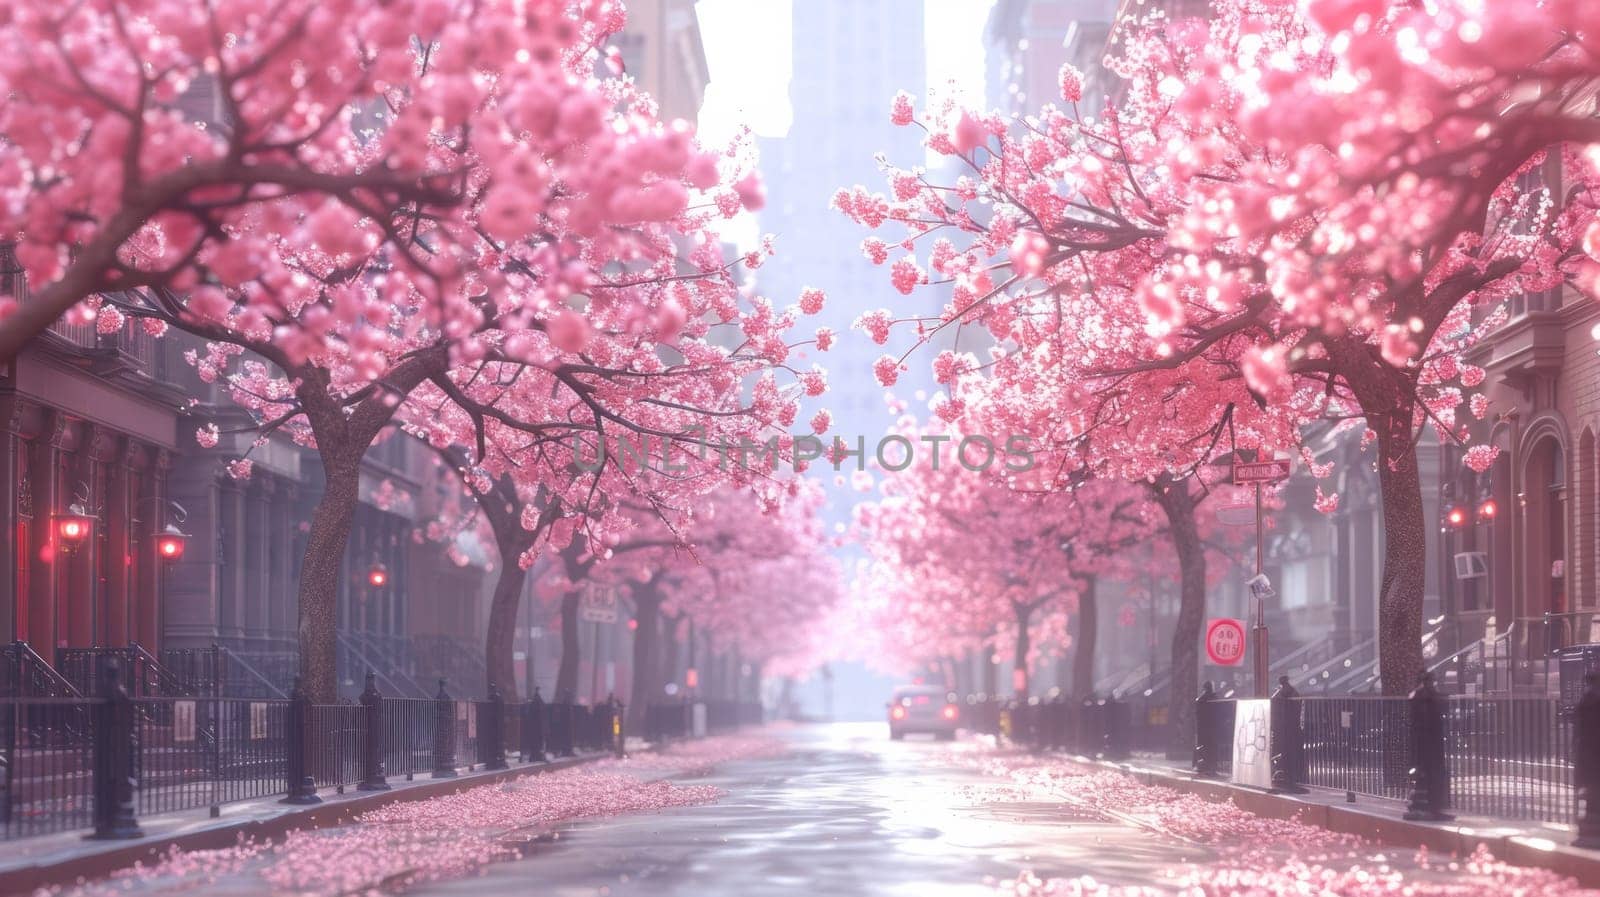 A street lined with pink trees and flowers in bloom, AI by starush